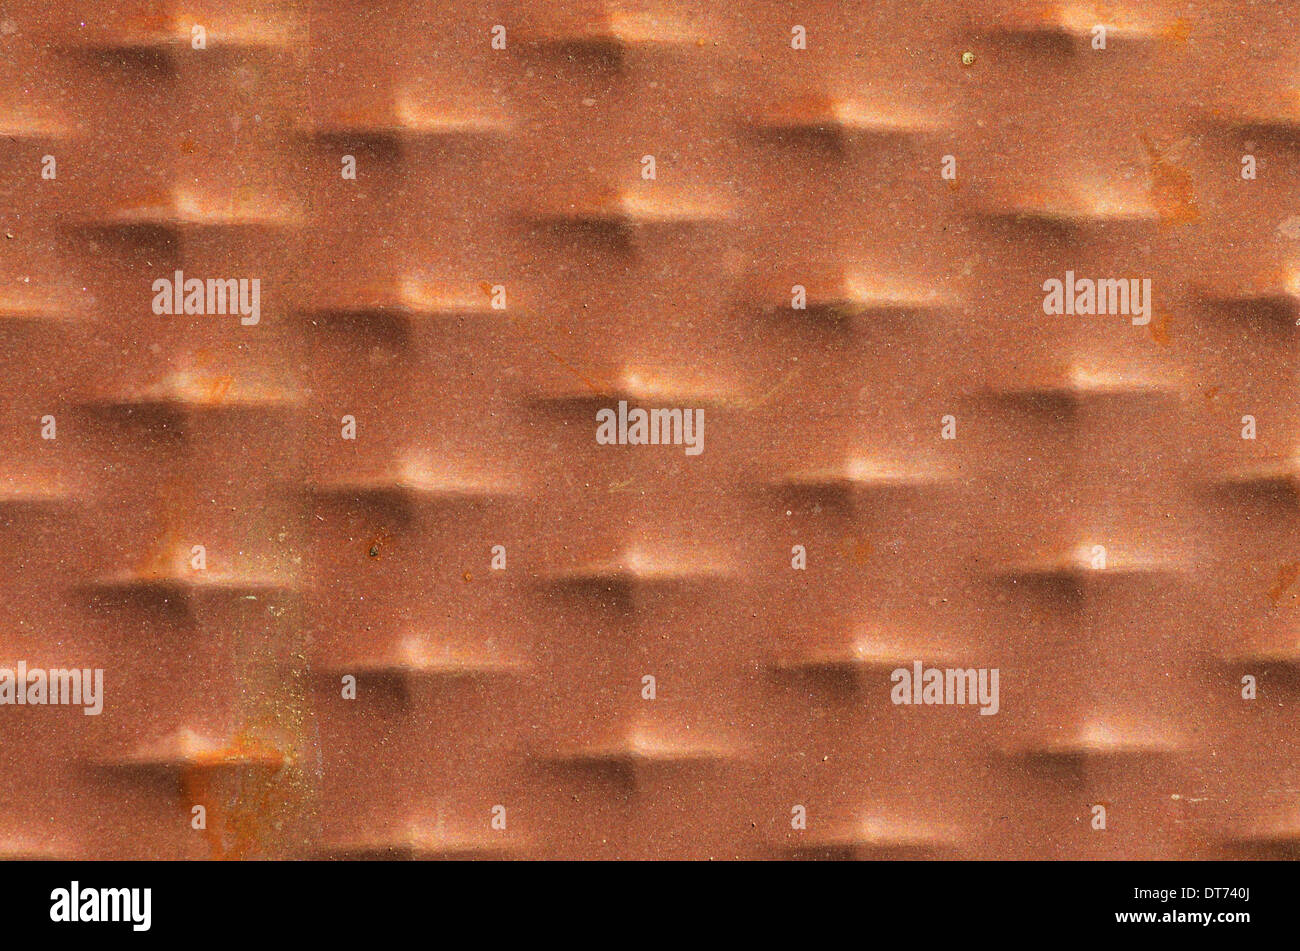 image of textured metal copper sheet for background Stock Photo